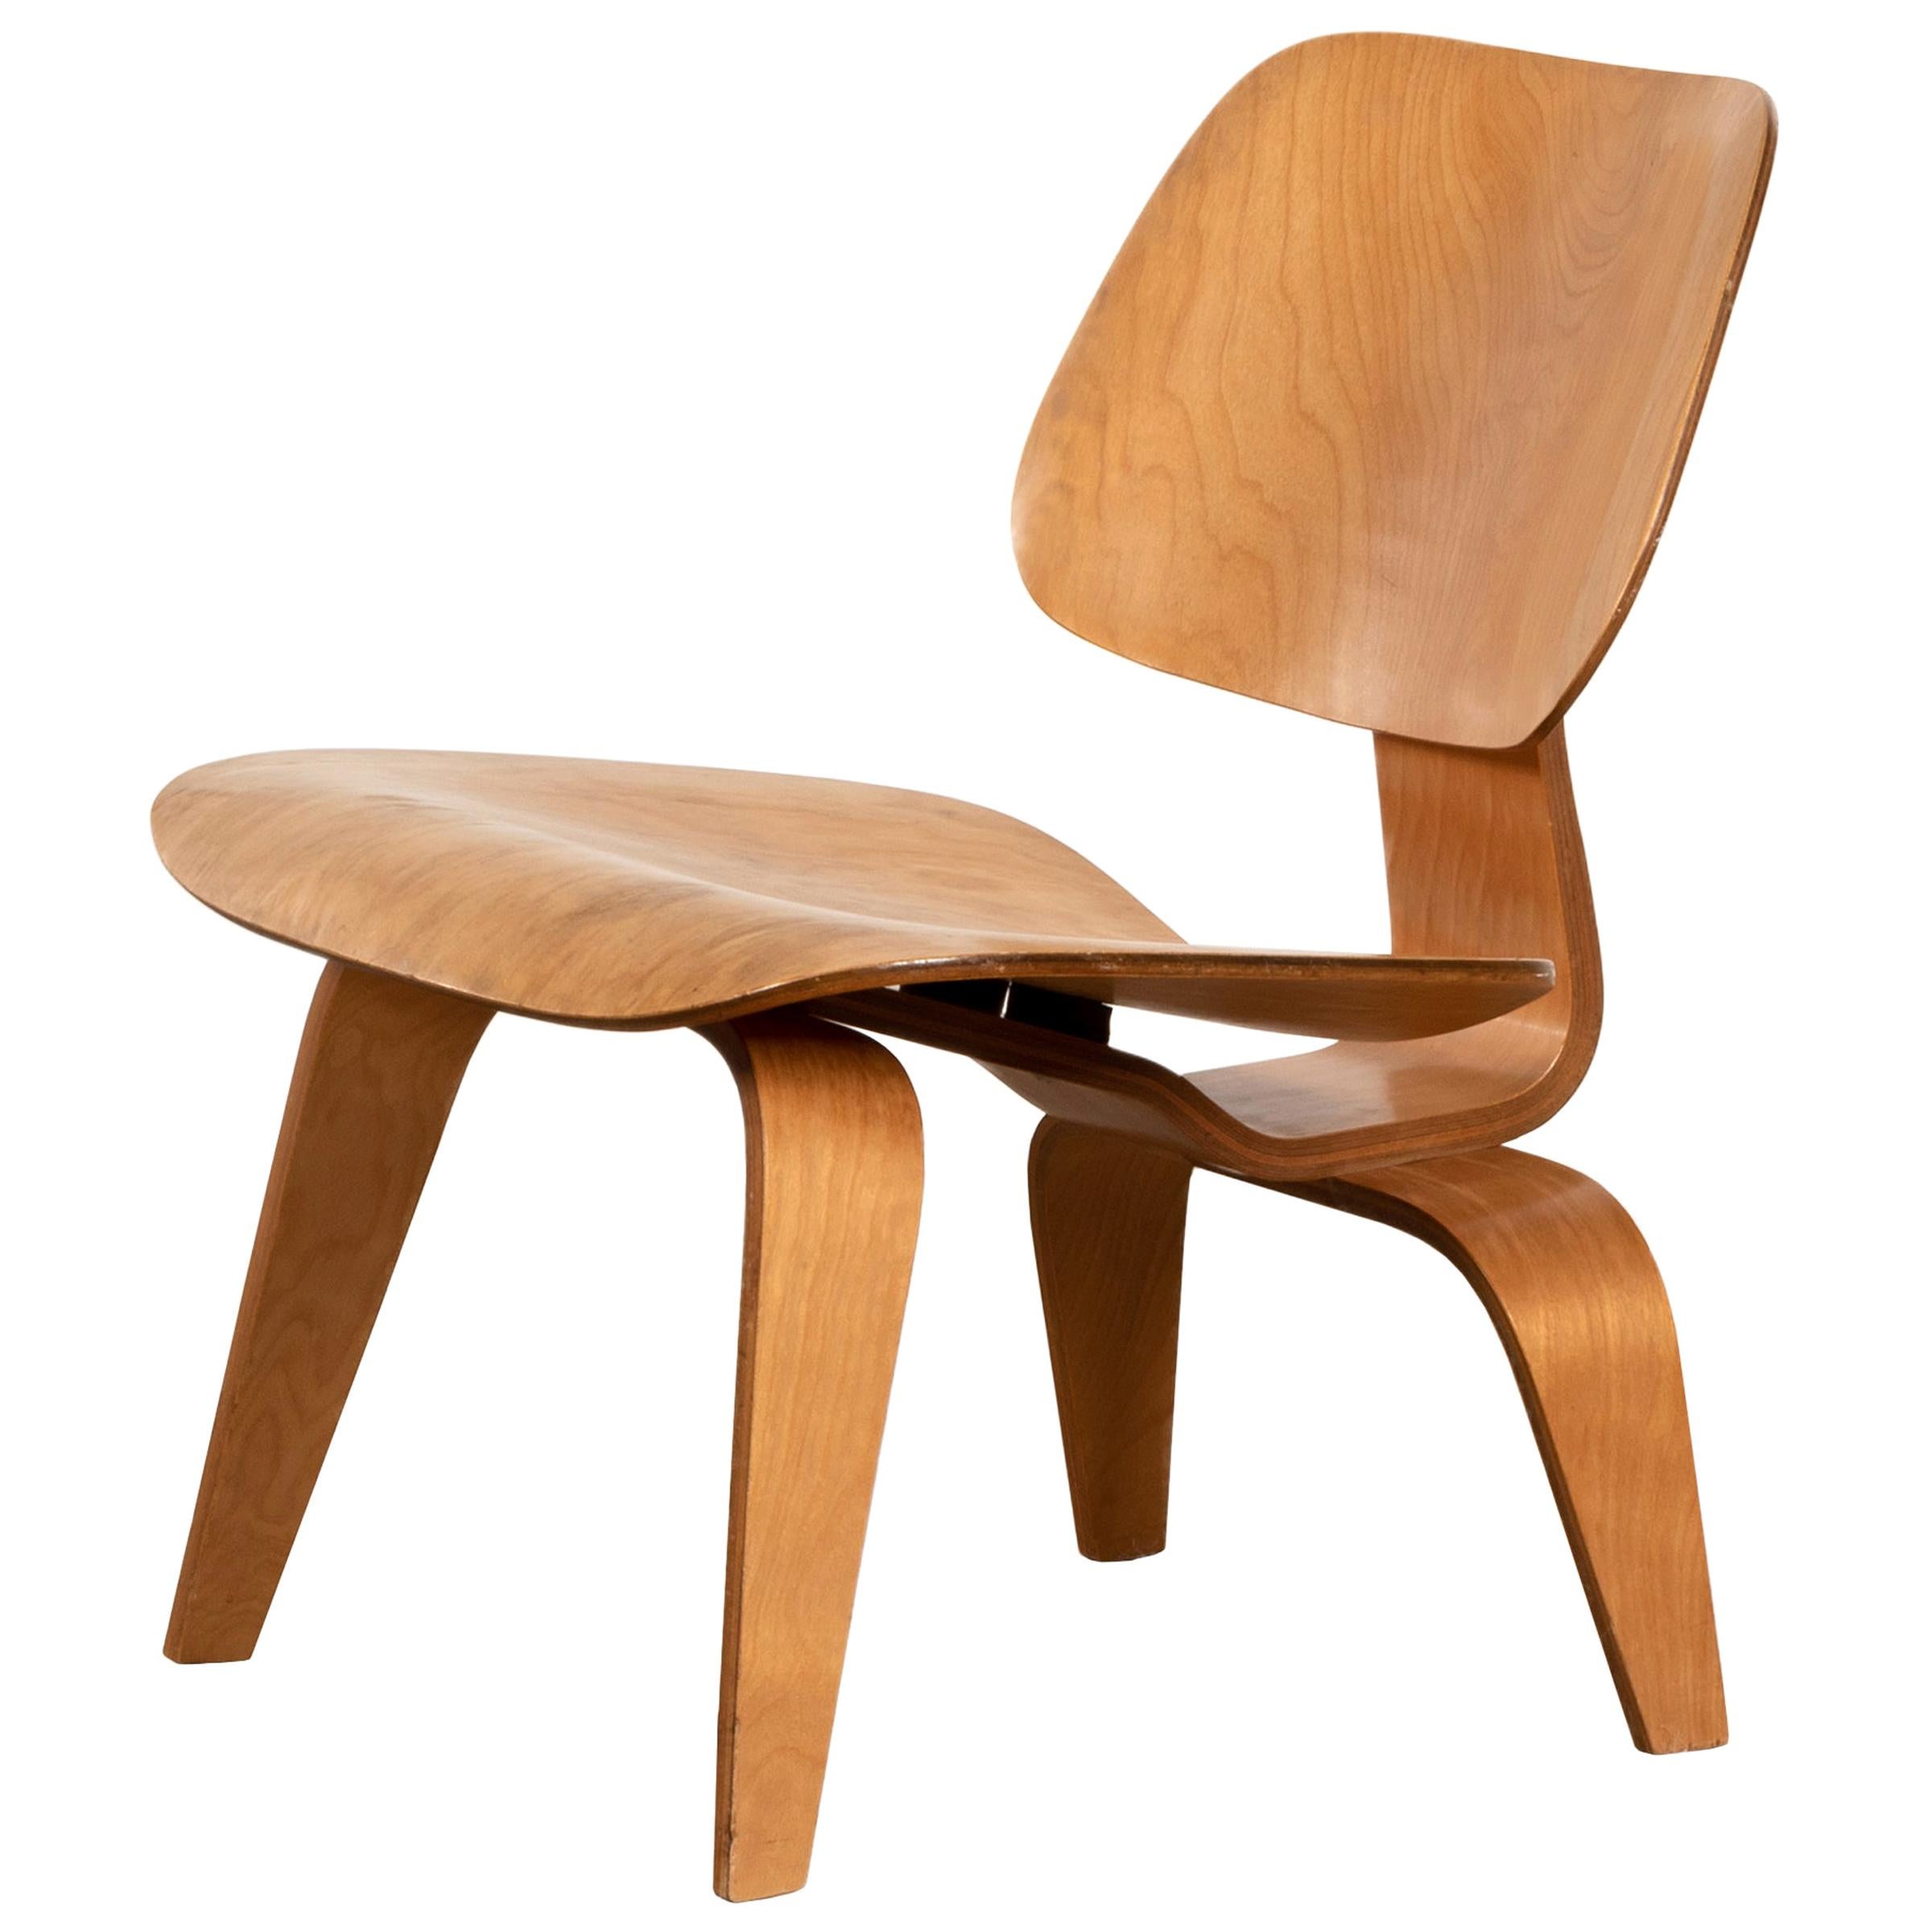 Charles and Ray Eames Early LCW Maple Lounge Chair for Evans Products, 1947